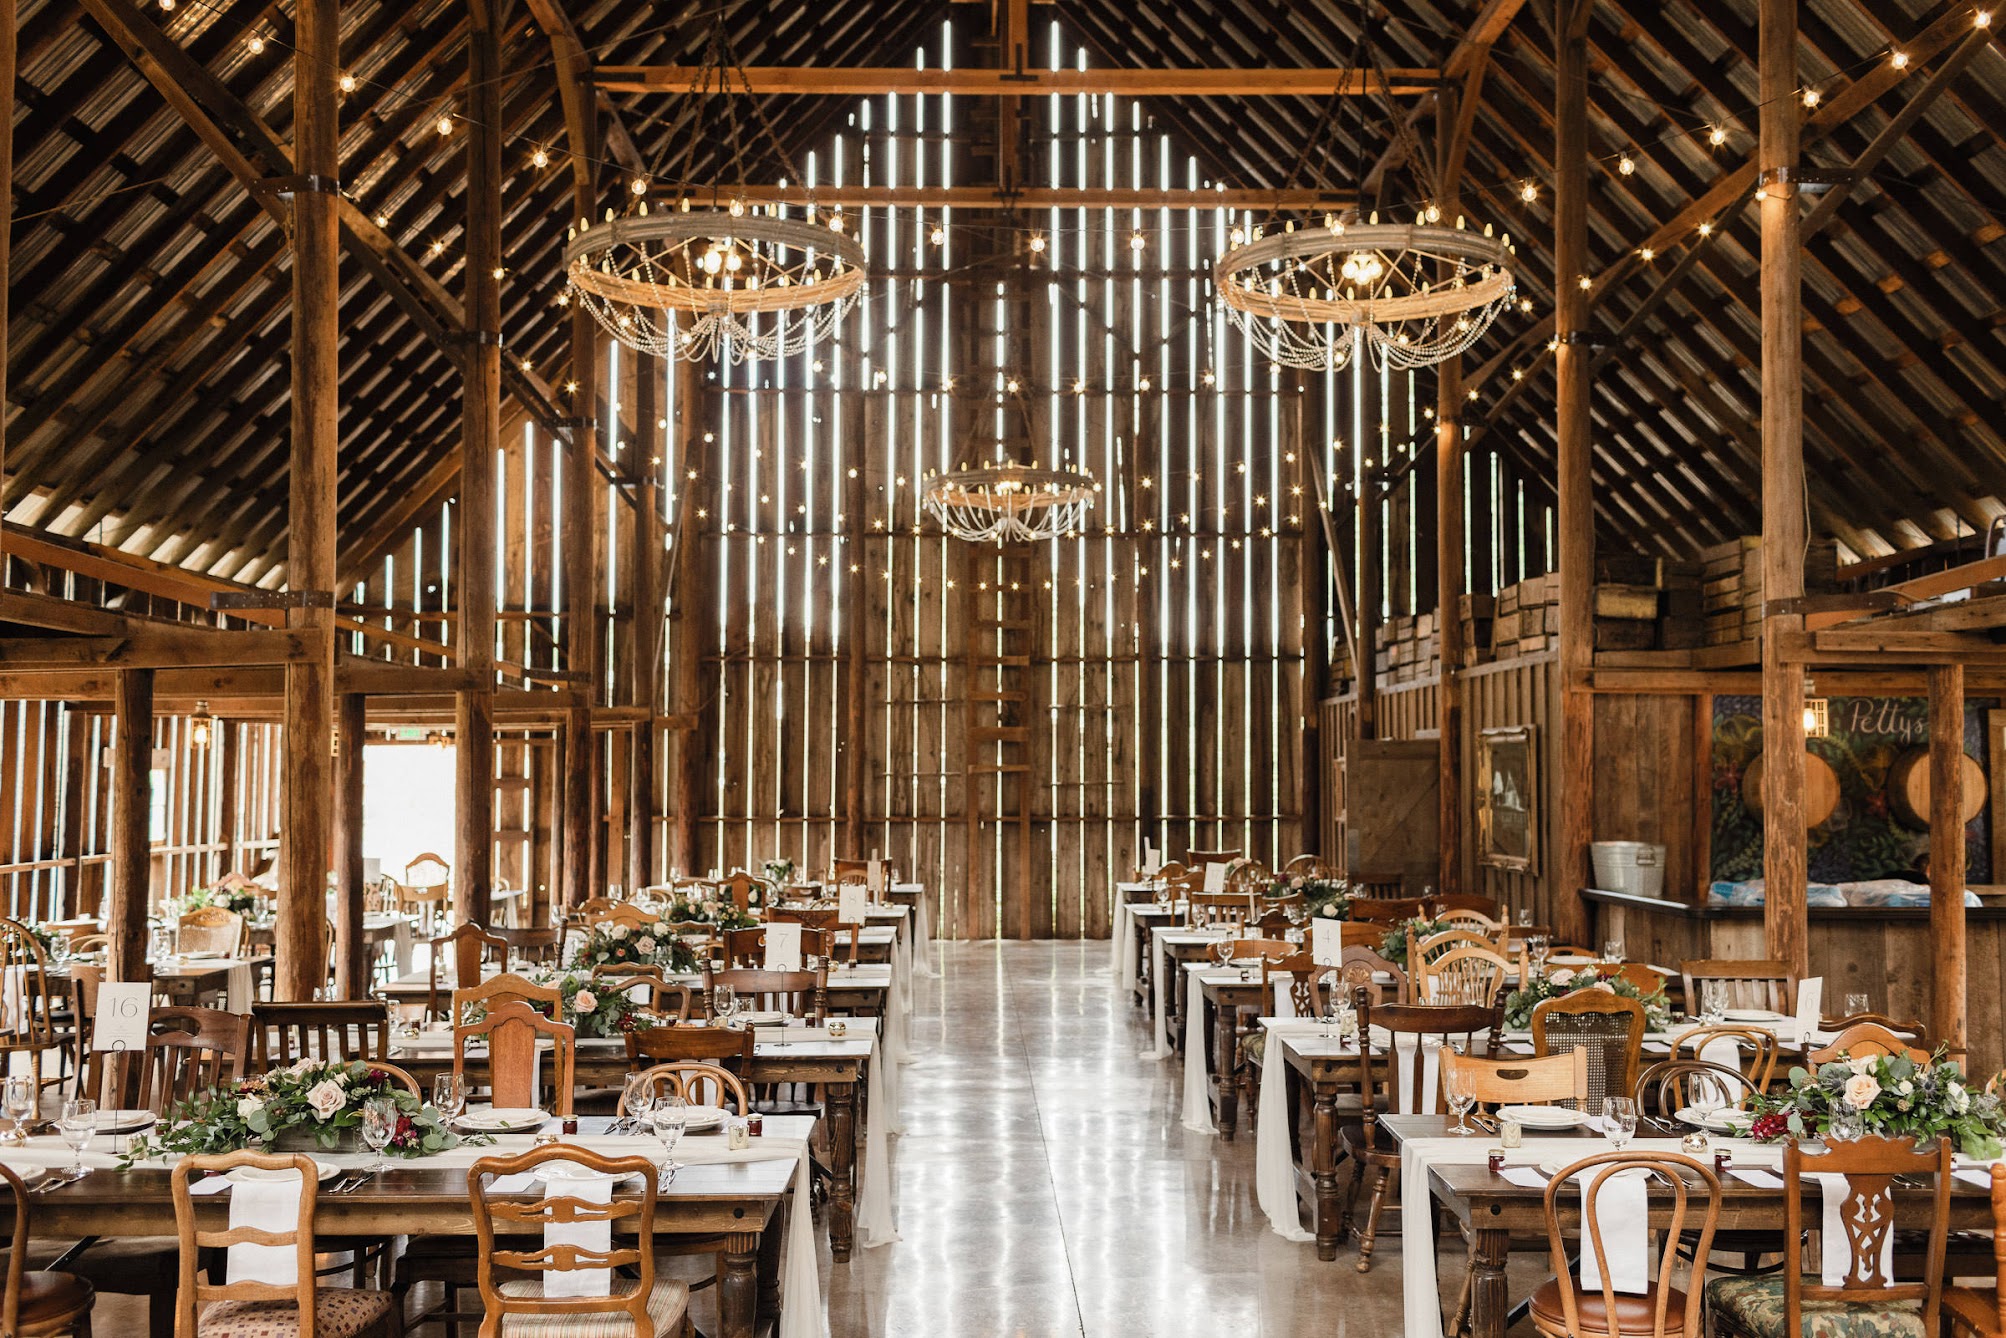 Three large chandeliers hanging in a large barn with bistro lights